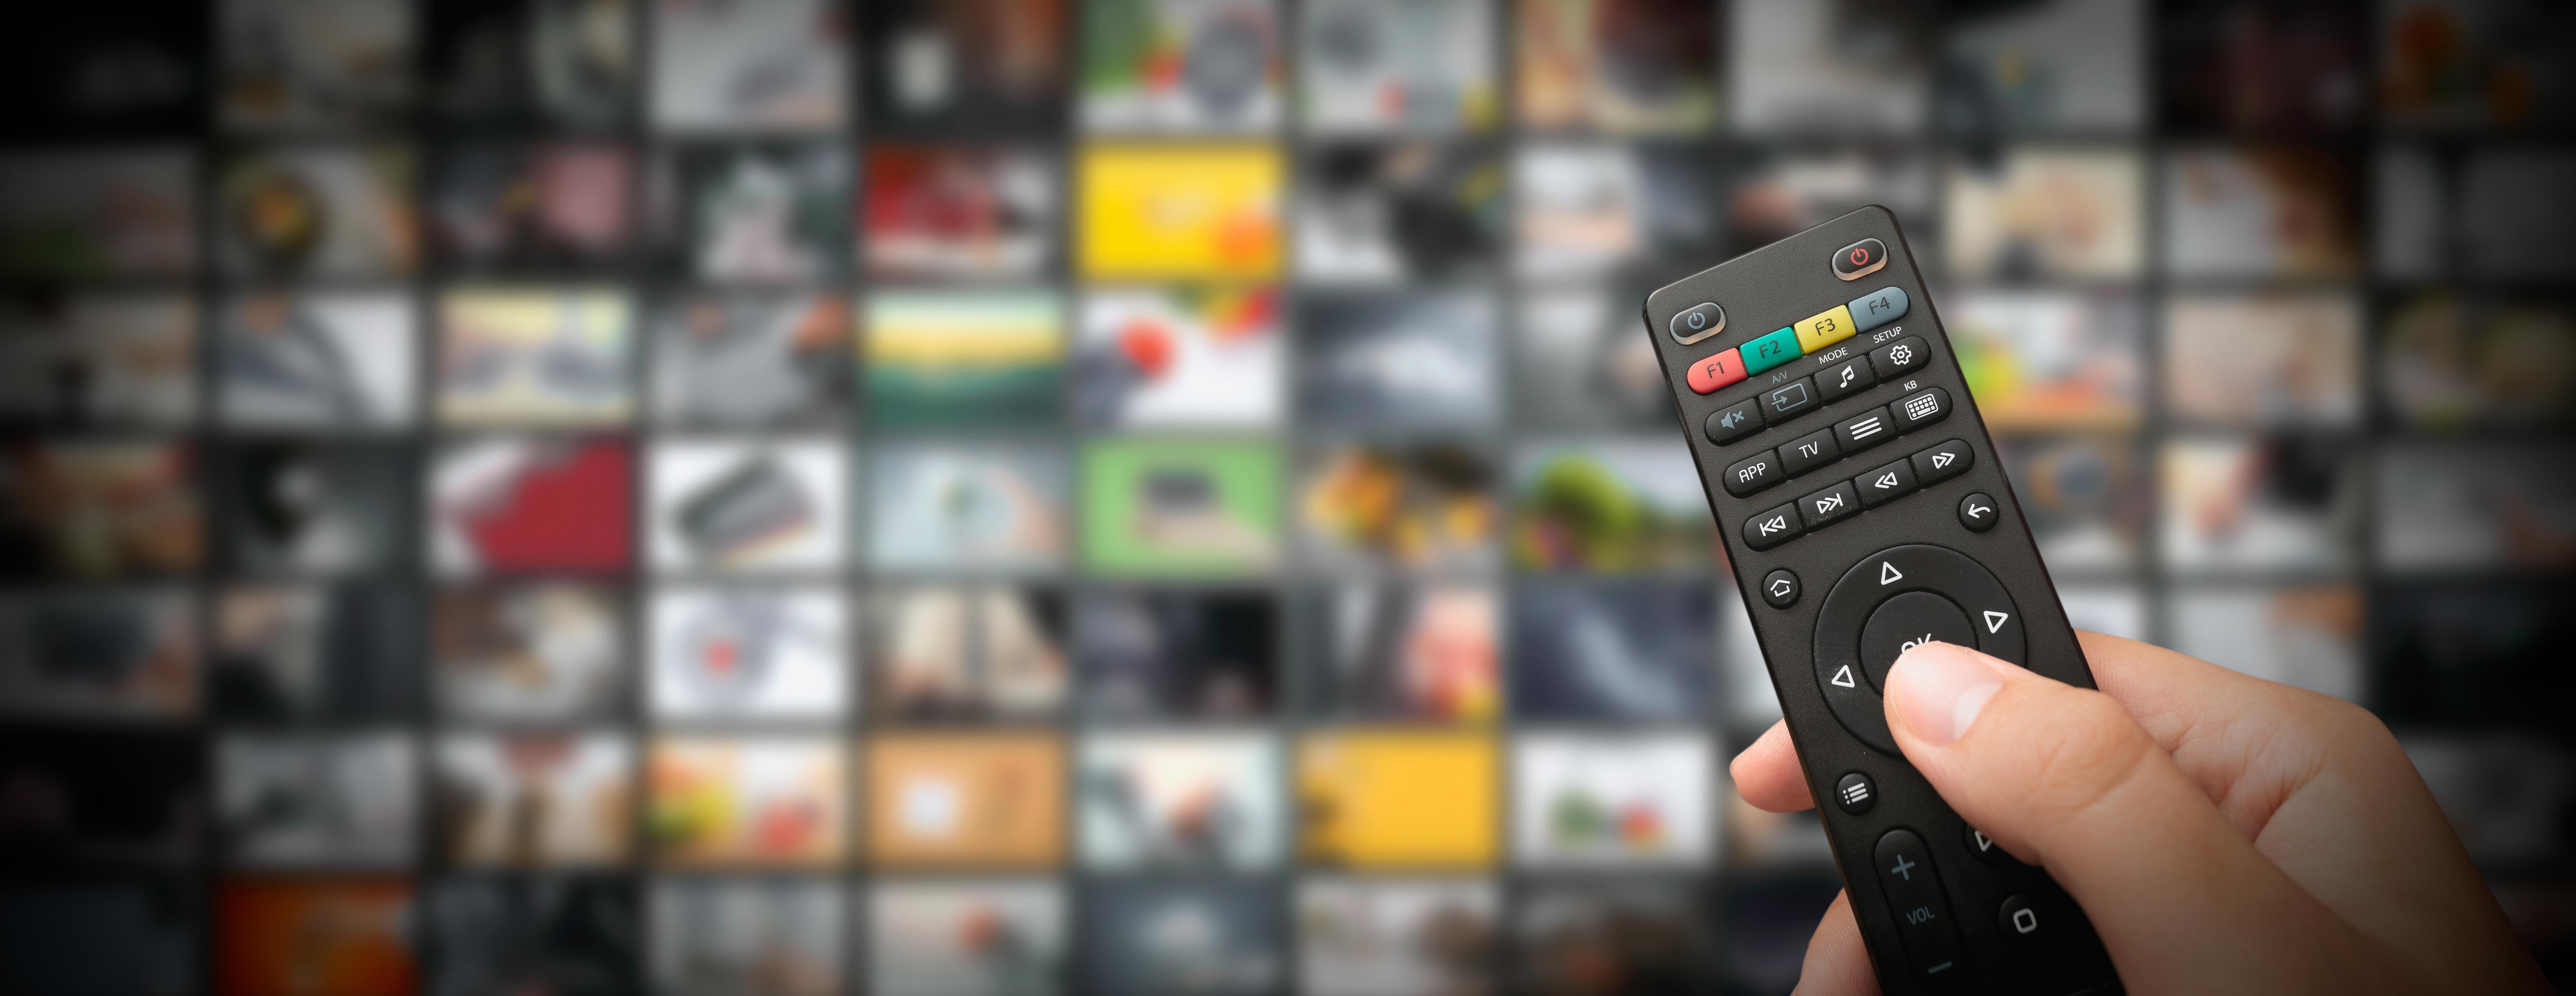 3 ways to make your normal TV a smart TV